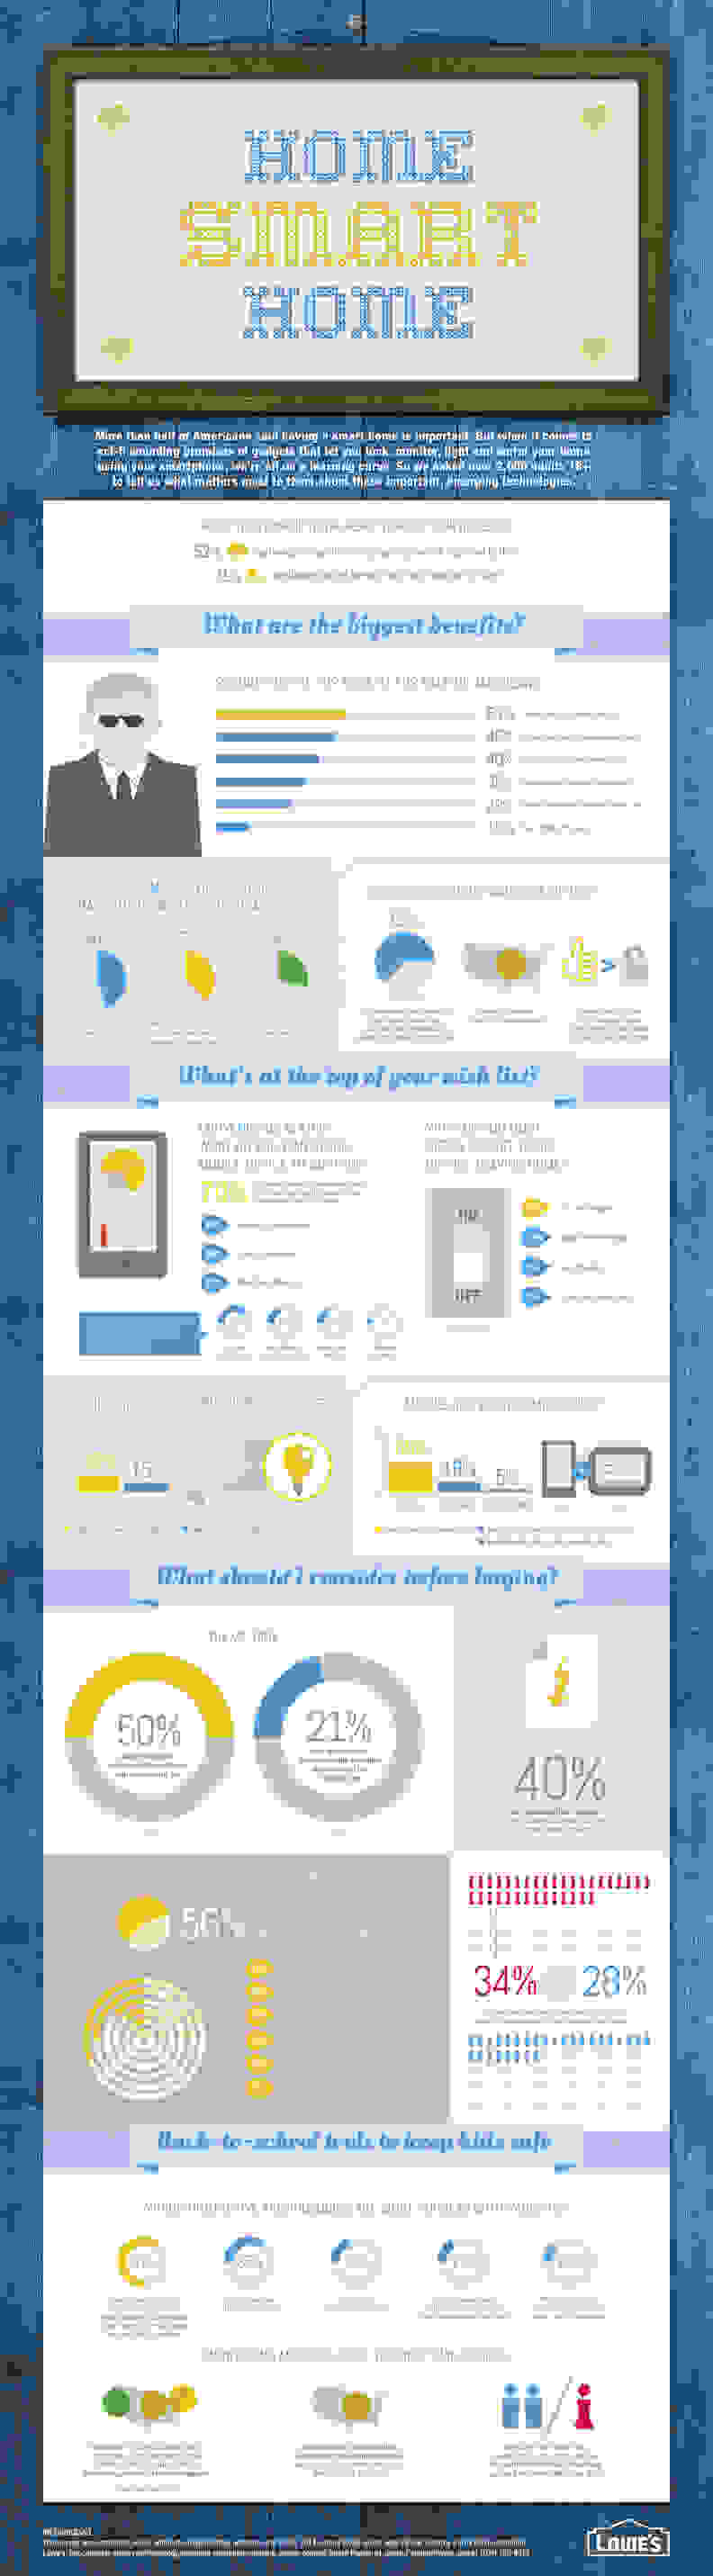 Lowe's 2014 Smart Home Survey Infographic